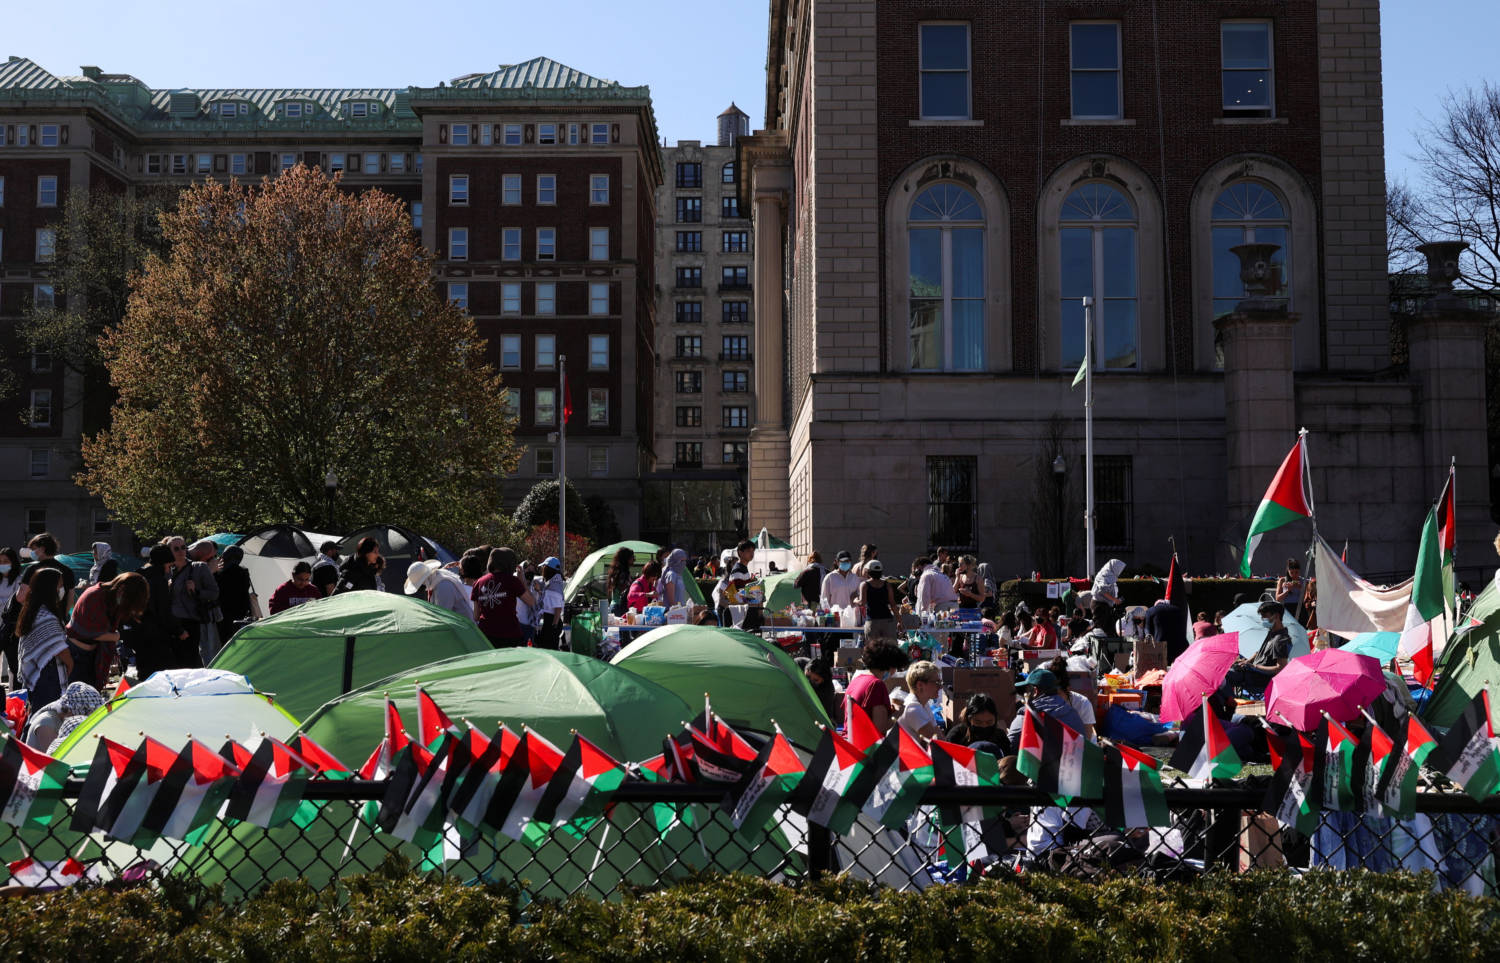 Protests Continue At Columbia University In New York During The Ongoing Conflict Between Israel And The Palestinian Islamist Group Hamas